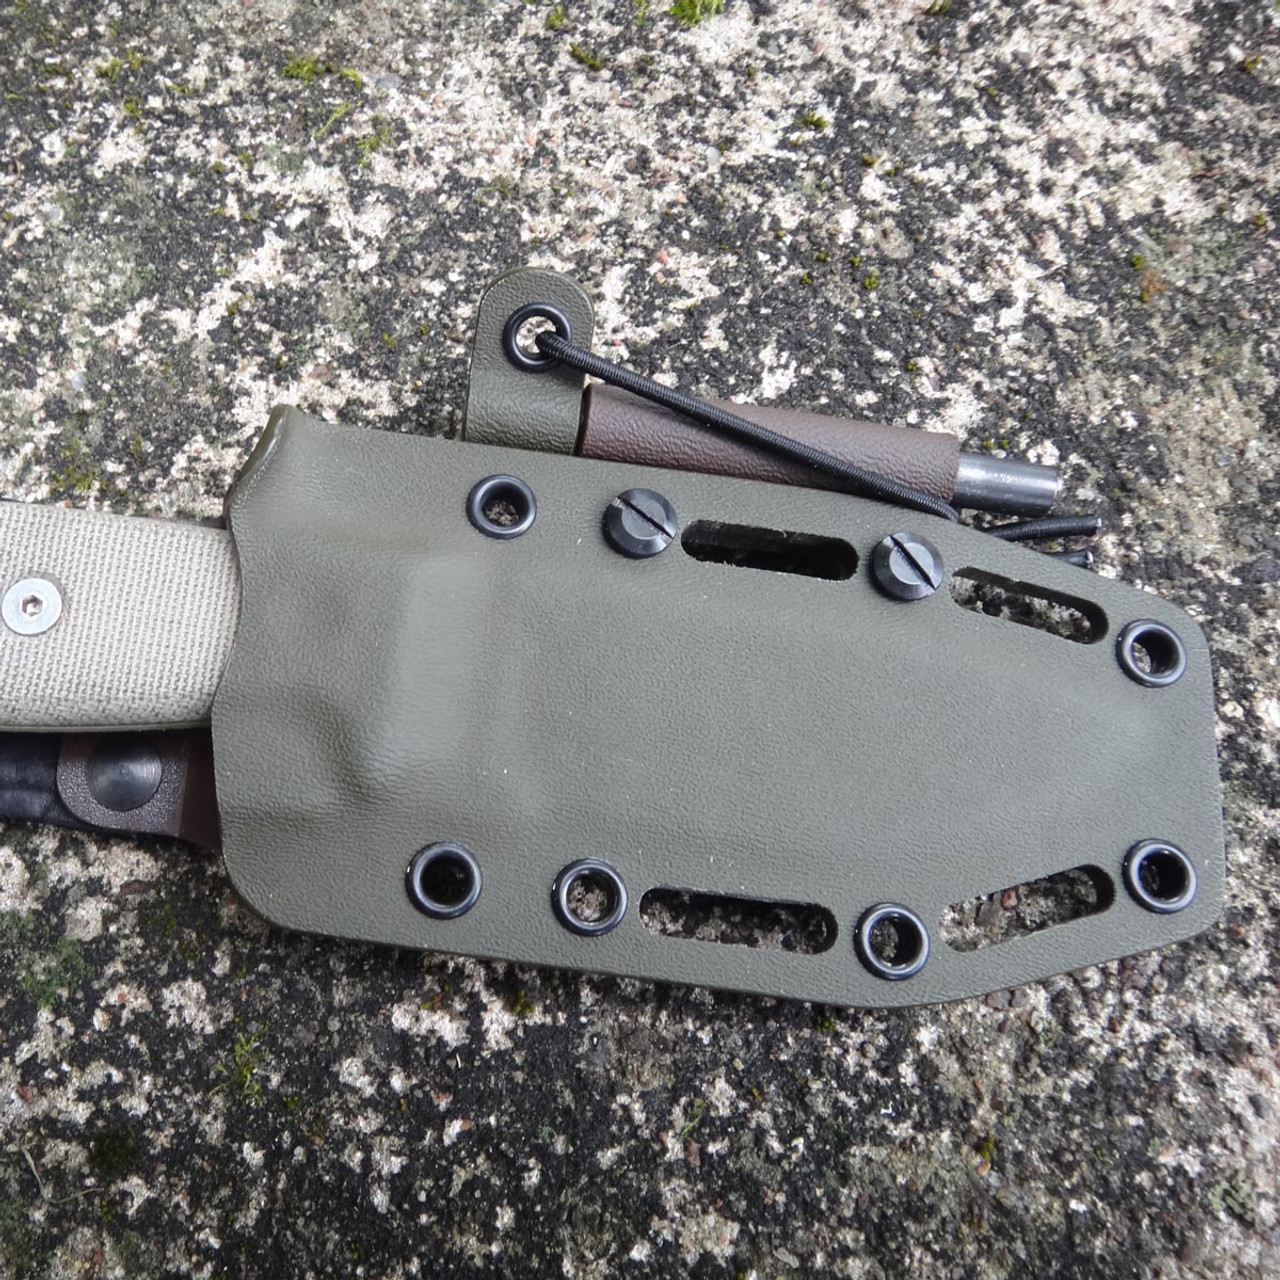 https://cdn11.bigcommerce.com/s-5cuidcsd/images/stencil/1280x1280/products/148/399/ESSE_4_custom_kydex_knife_sheath_elite_pancake_with_milled_slots__53472.1398723787.jpg?c=2